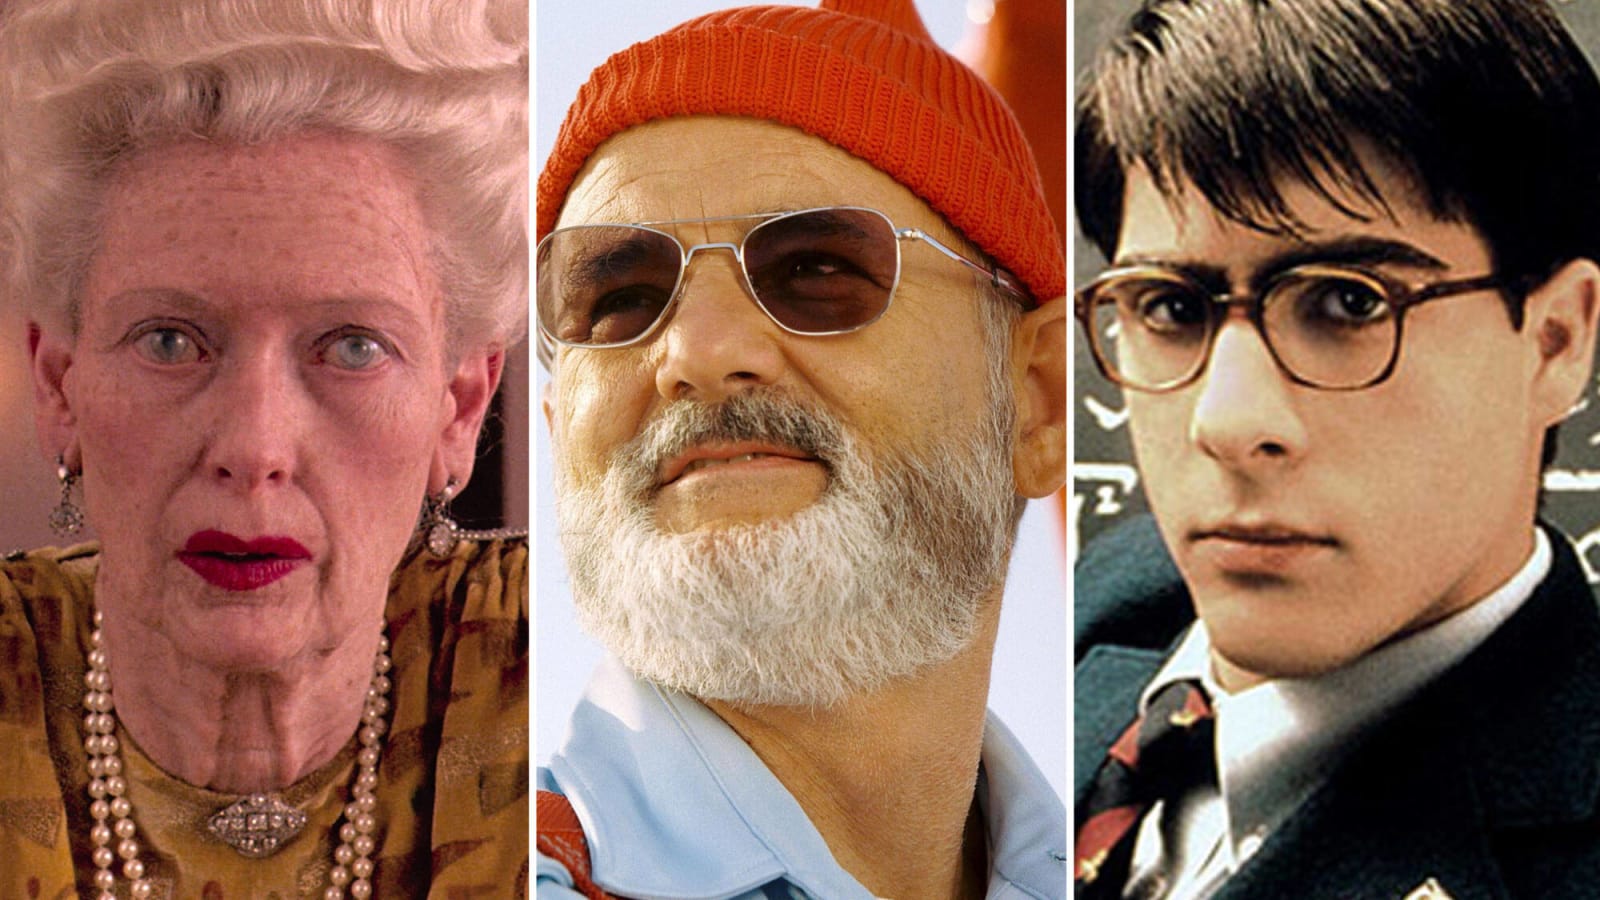 Who are Wes Anderson's most-frequent collaborators?